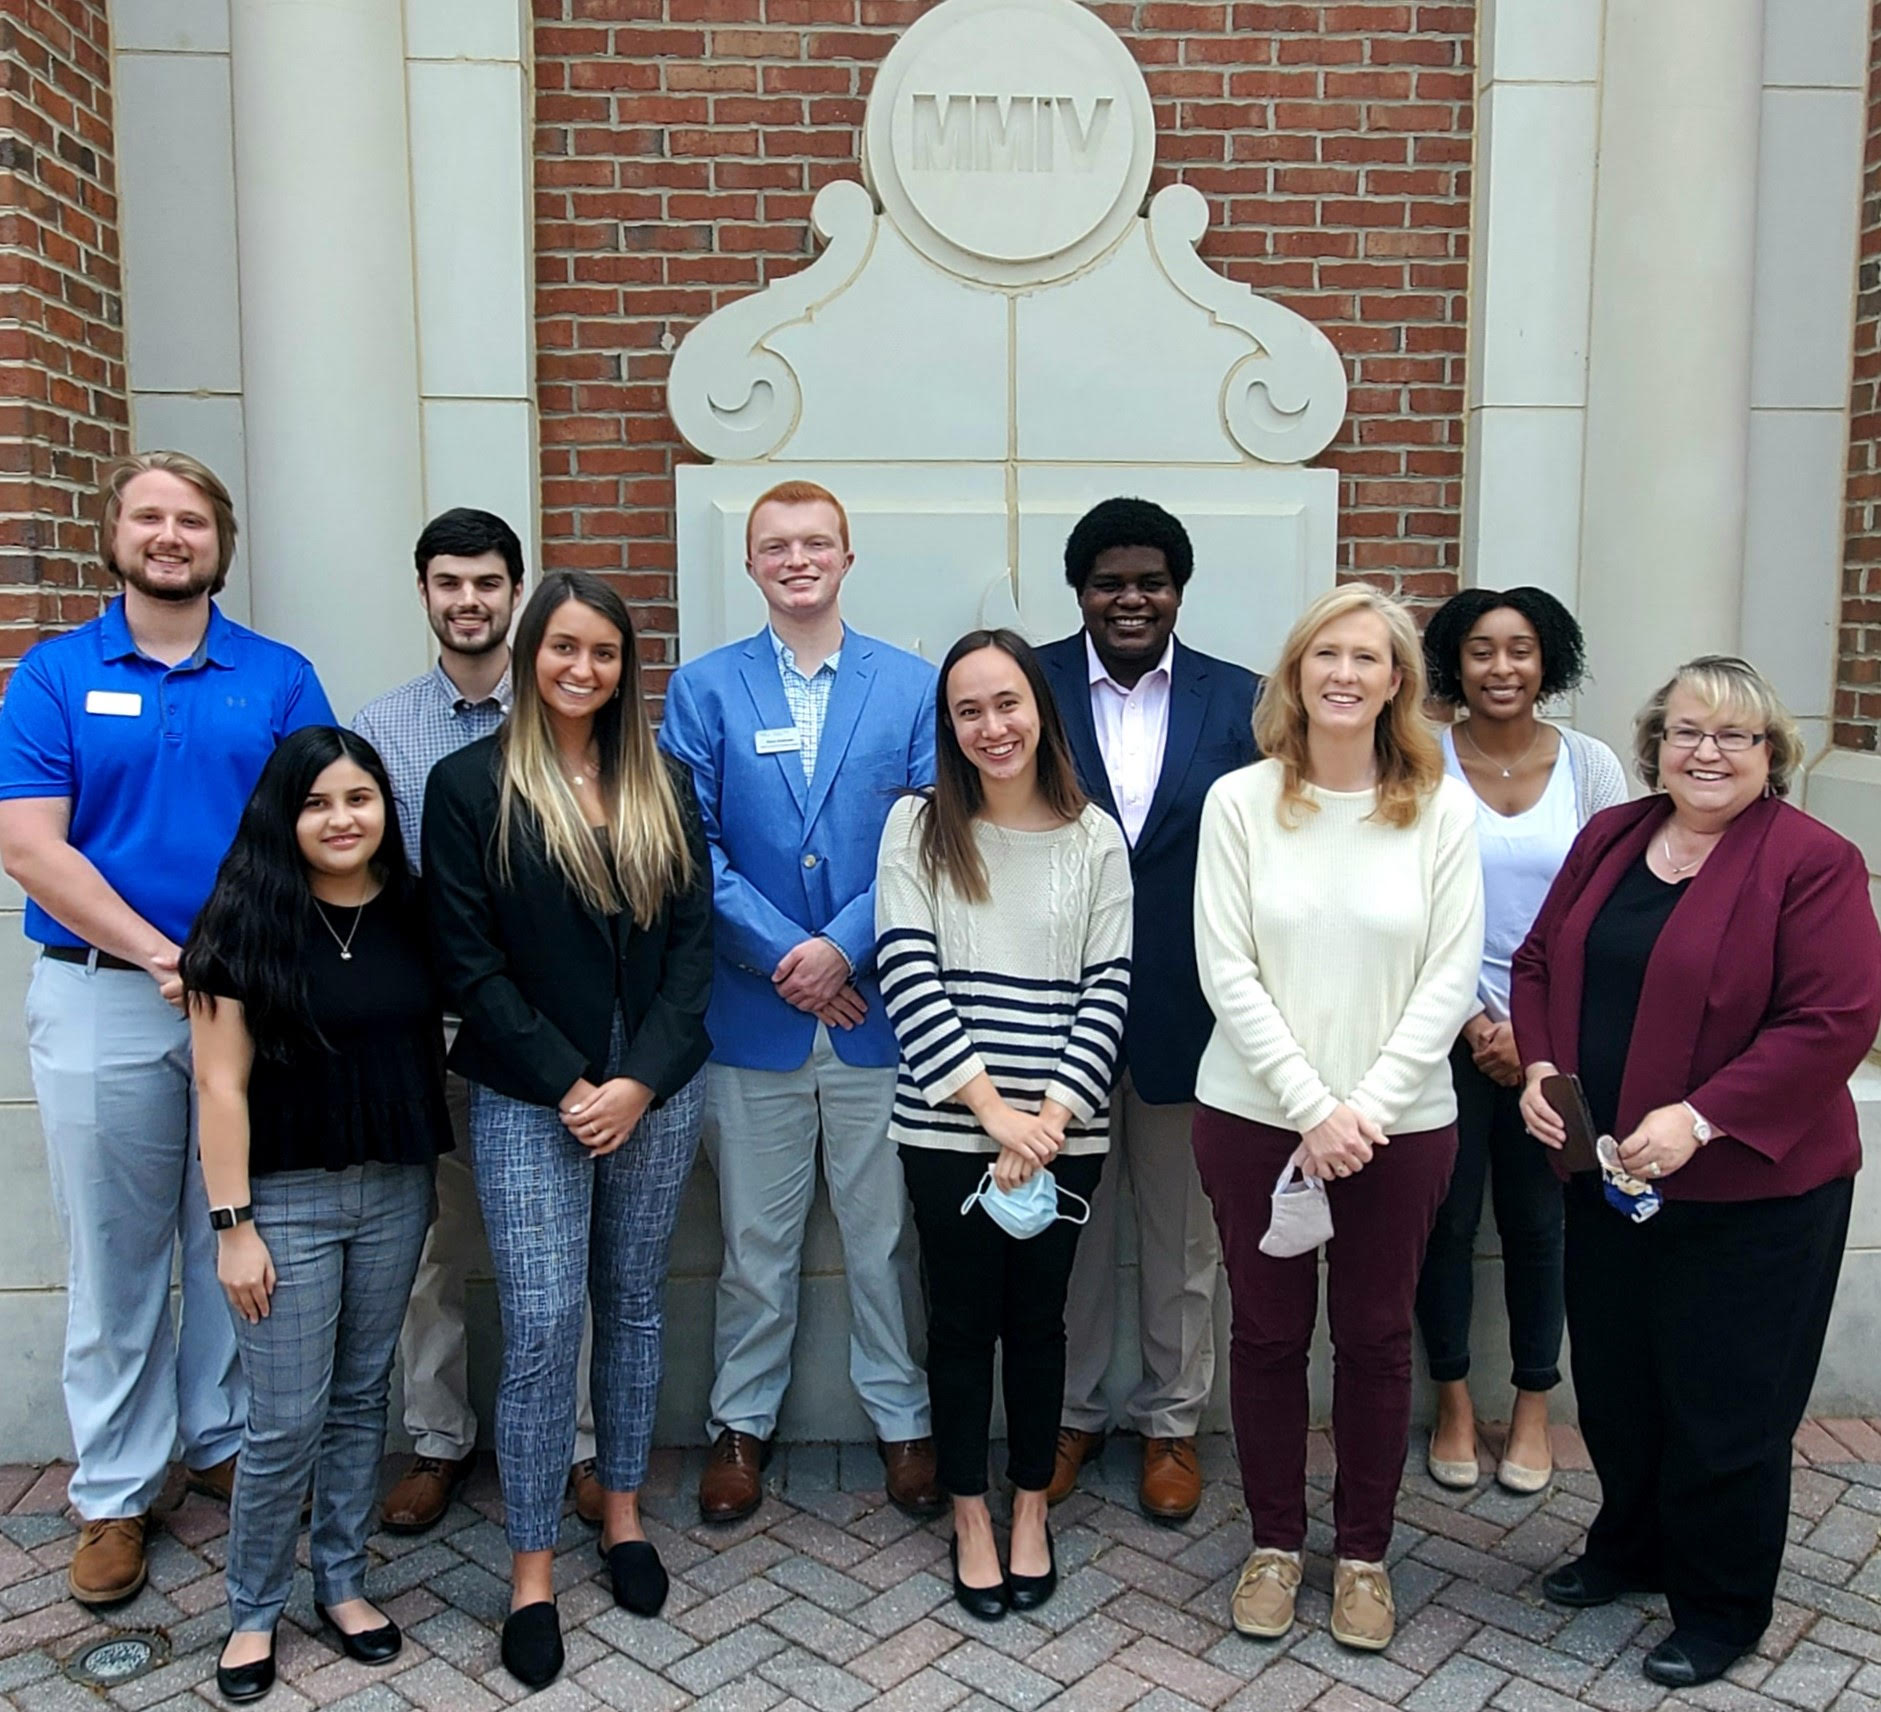 Previous members of the Dean's Council of Student Leaders 2020 to 2021